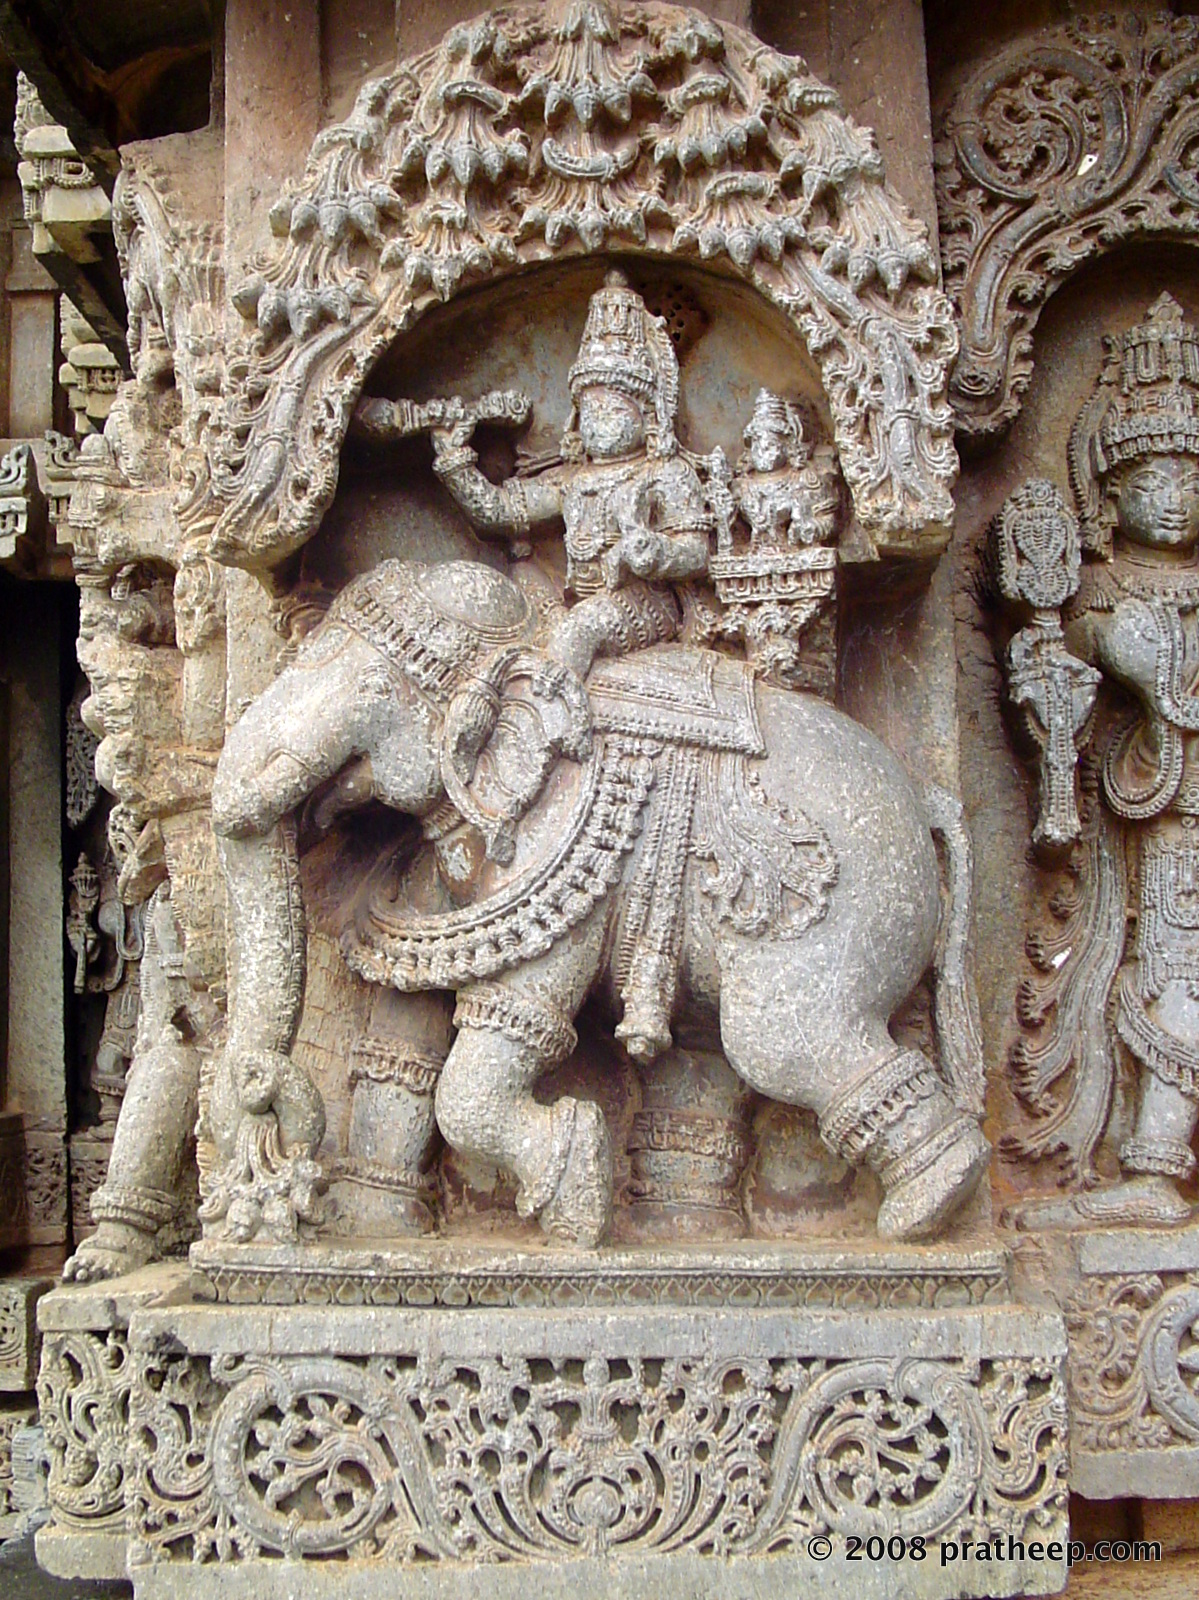 Riding the elephant called Airavat. seated behind indra is his consort, Indrani. 